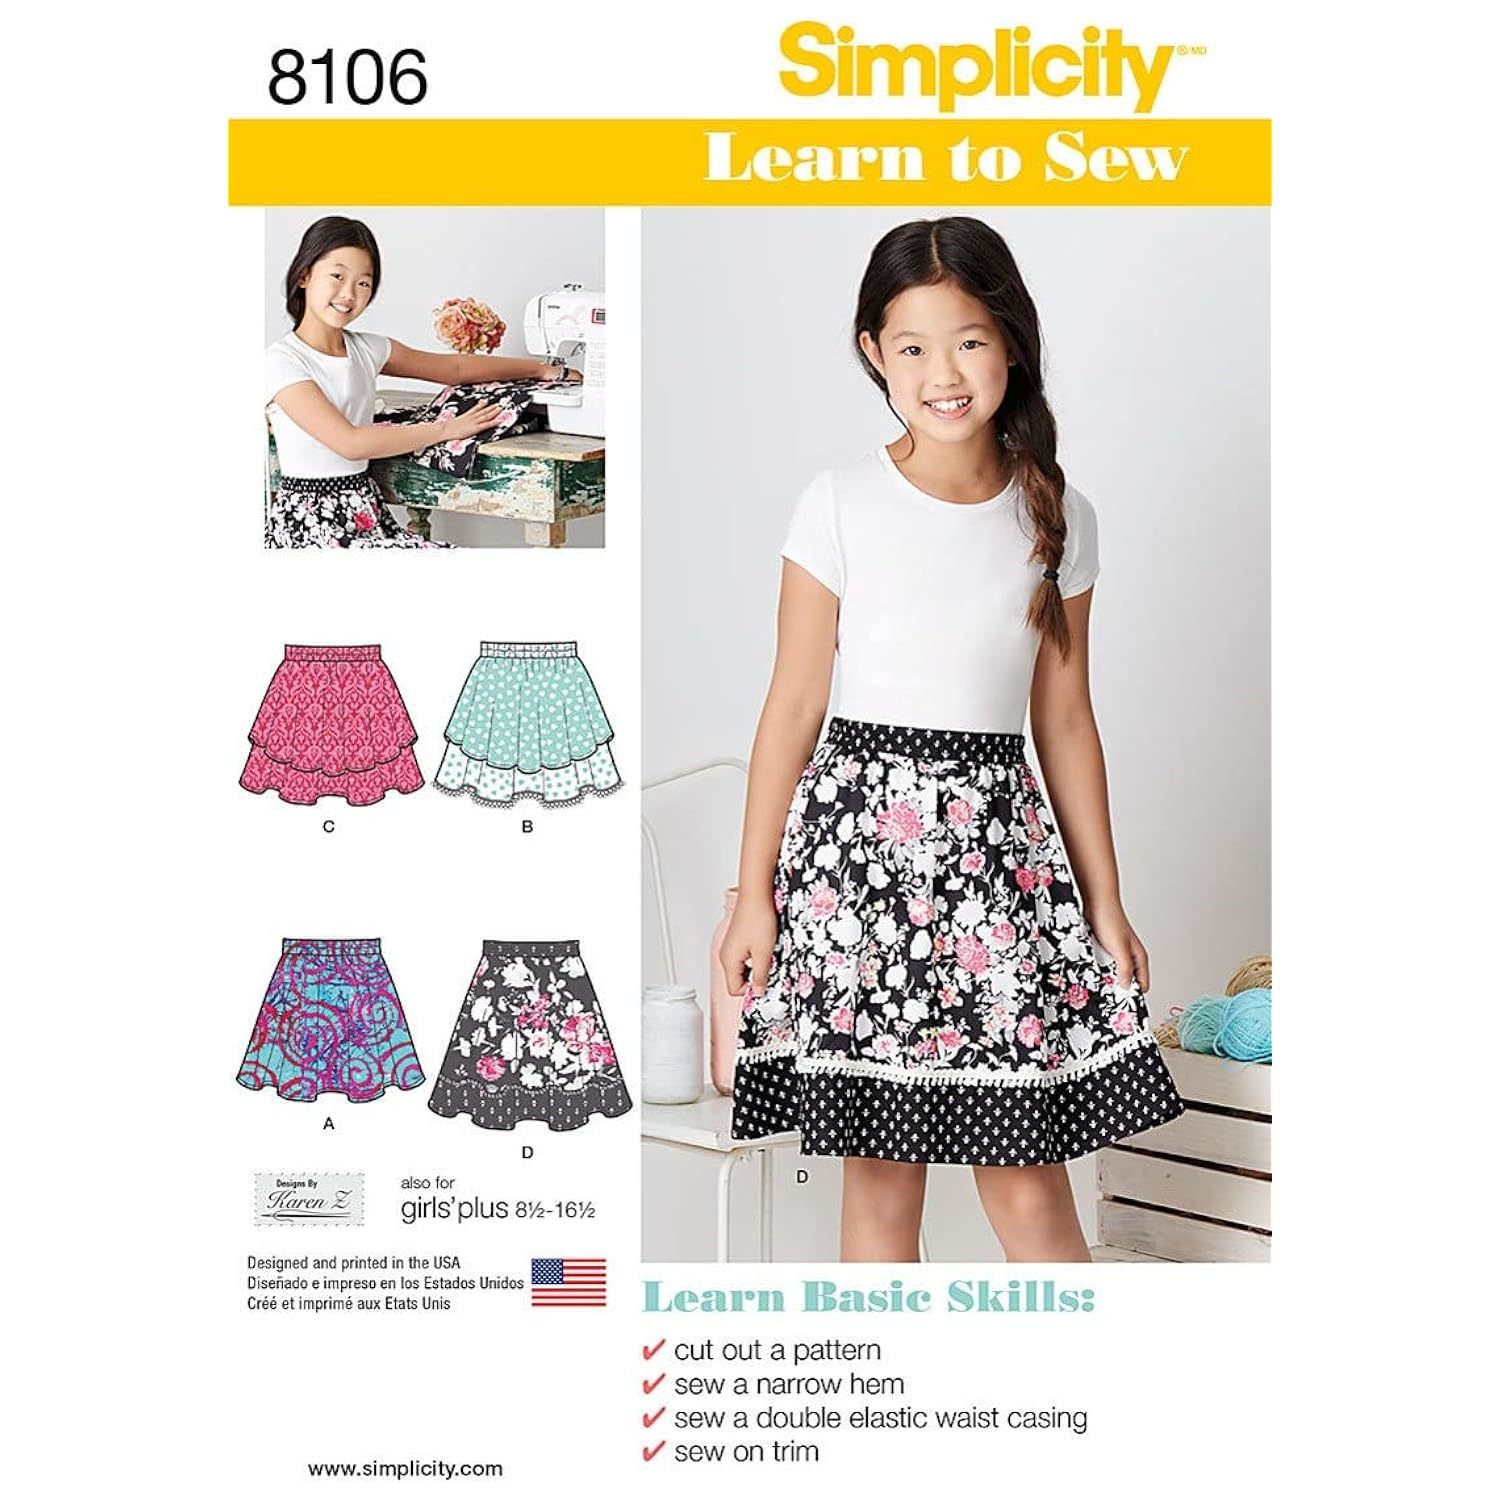 Primary image for Simplicity 8106 Easy to Sew Girl's Layered Skirt Sewing Pattern, Size 8-16